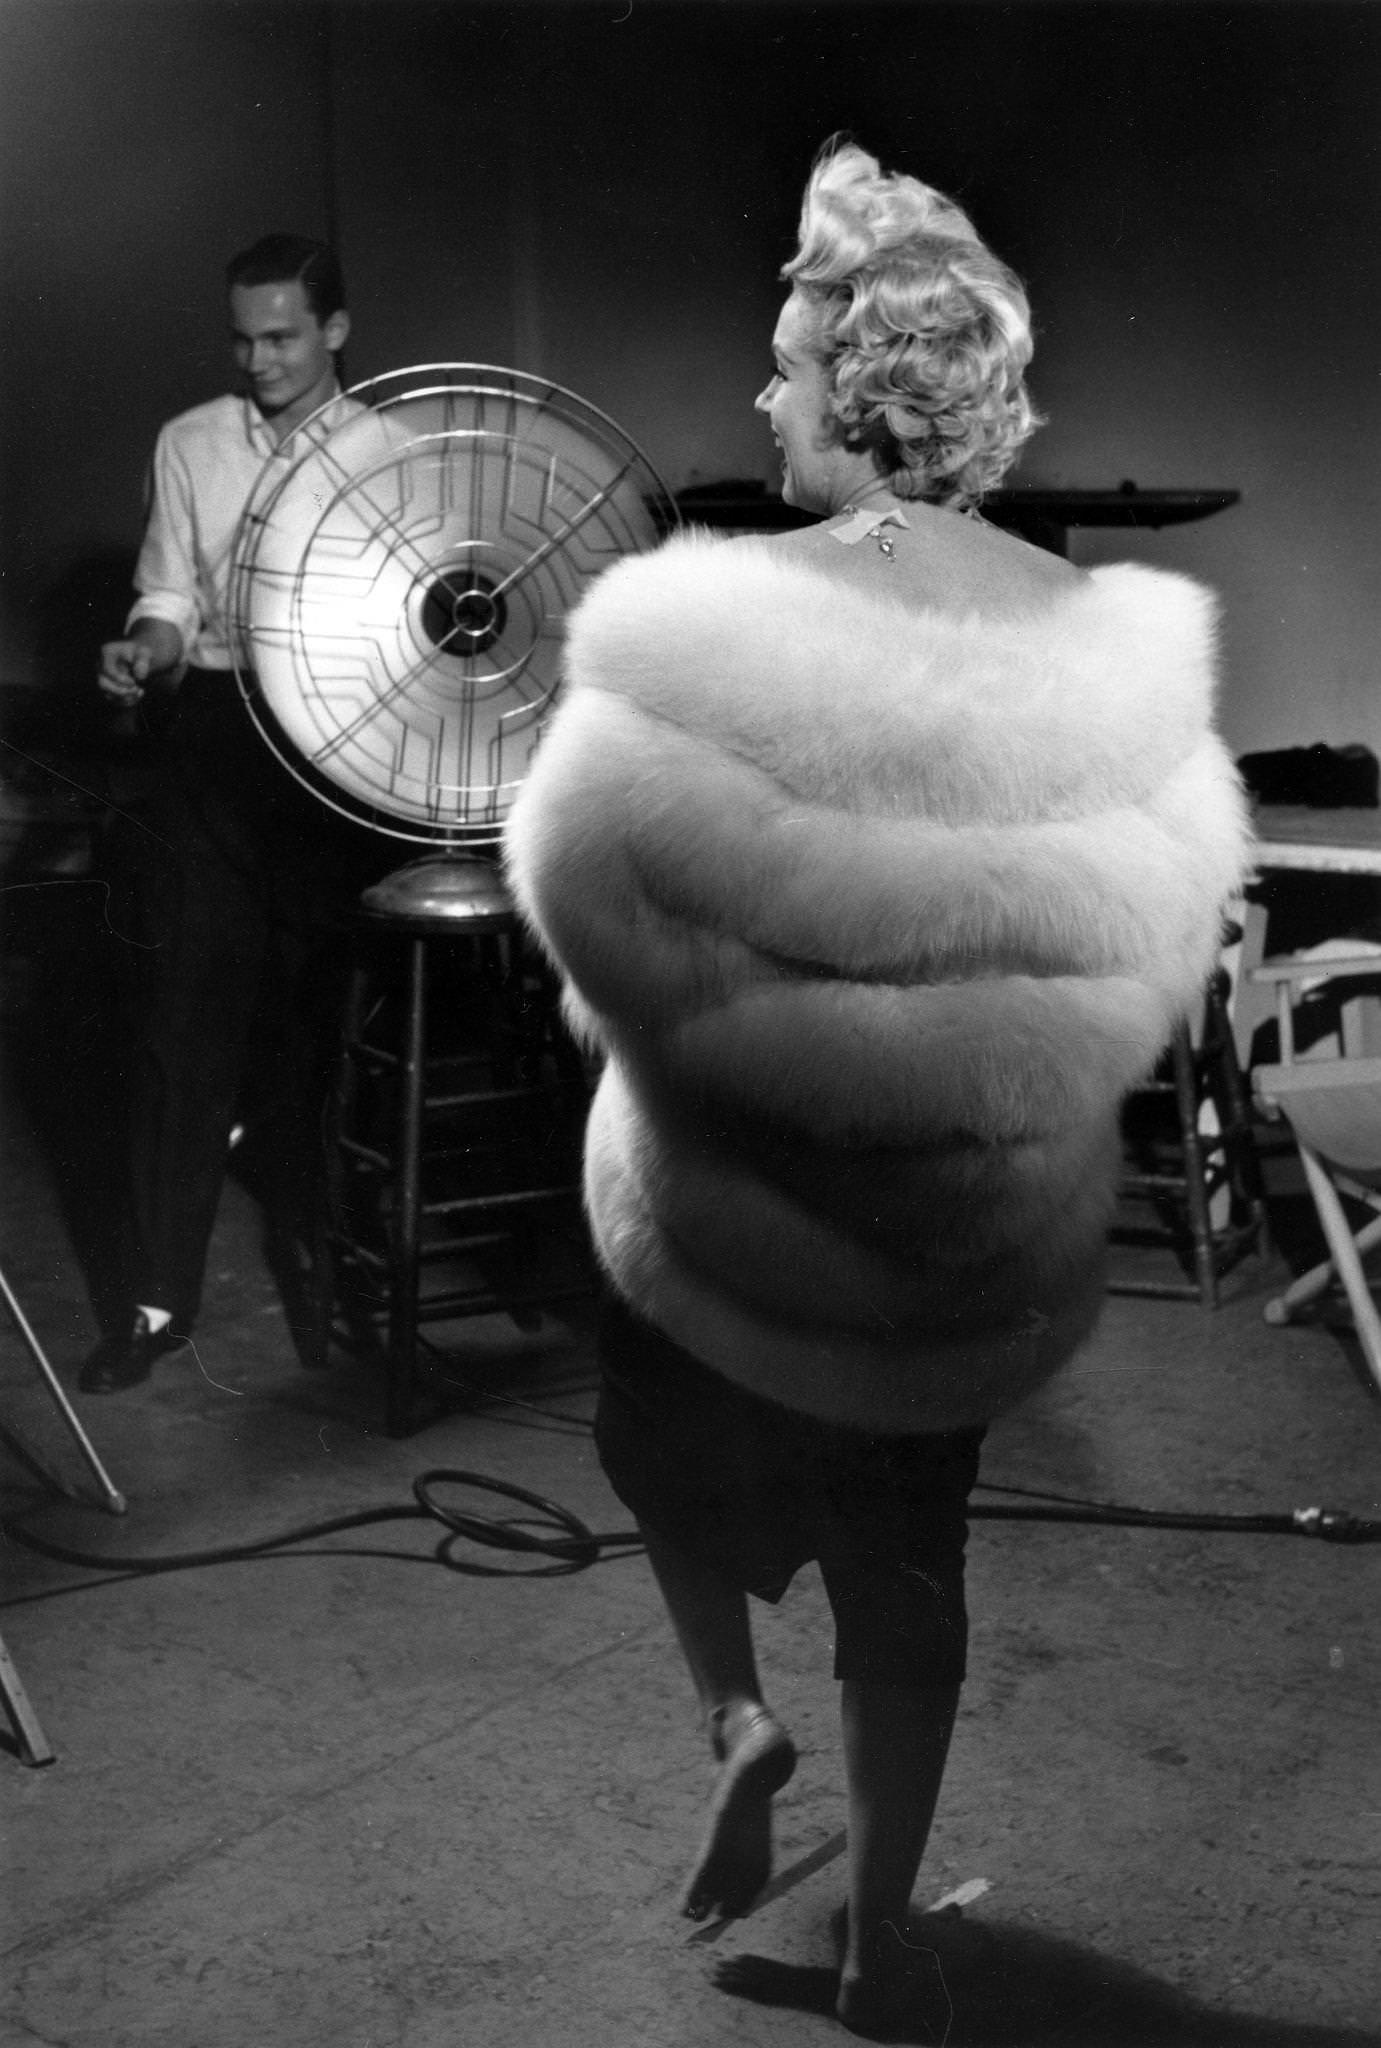 Marilyn Monroe wearing a white stole fur wrap prepares for a publicity photo shoot with Richard Avedon in his studio in 1954 during the filming of "The Seven Year Itch" in New York